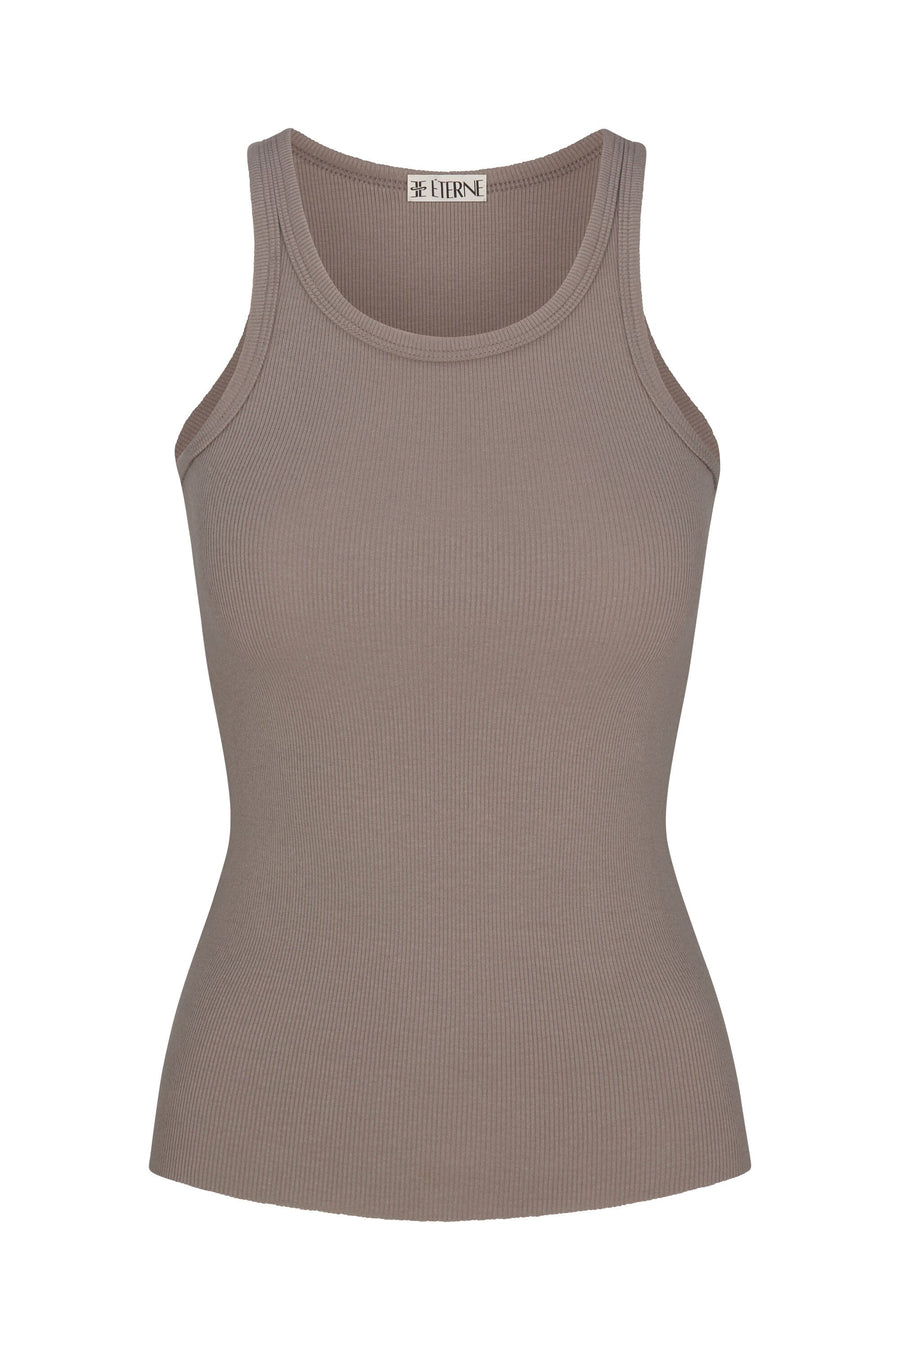 High Neck Fitted Tank Clay TANKS ÉTERNE 